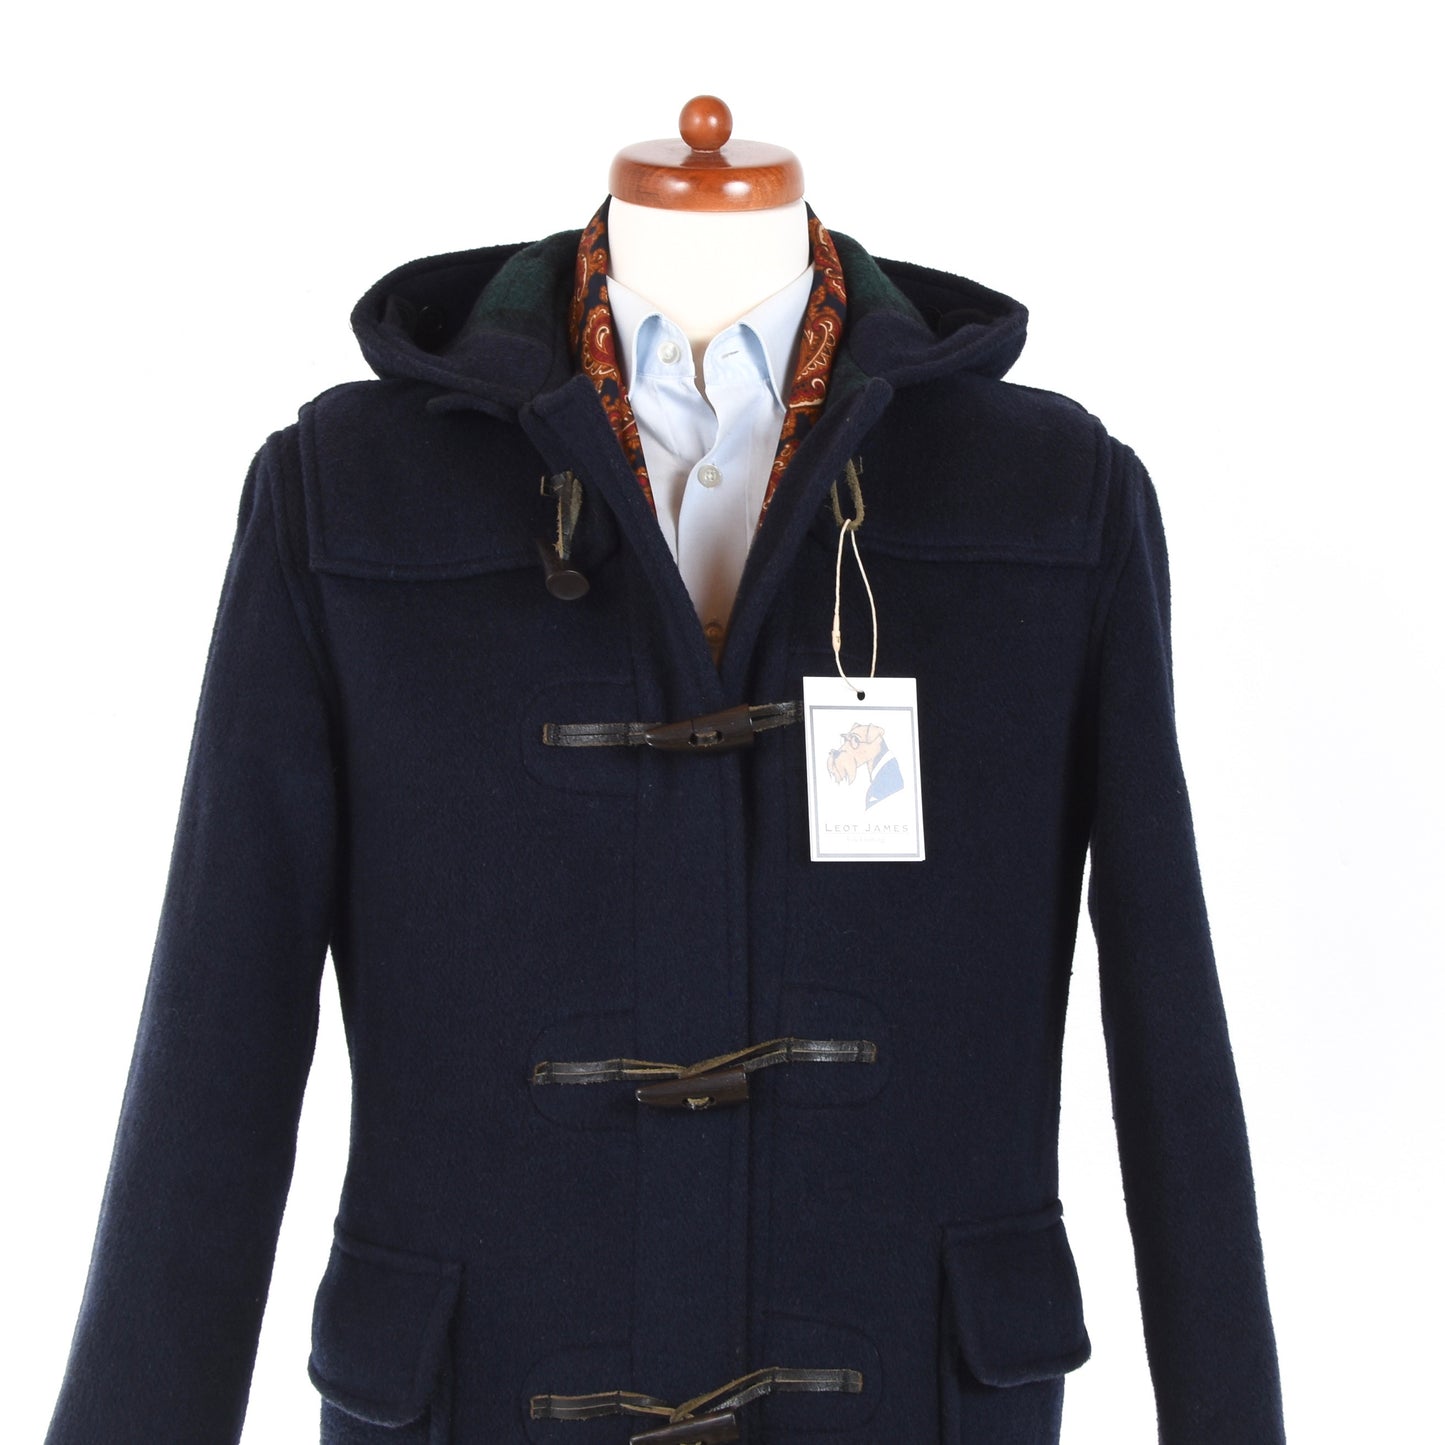 Gloverall for Country Life Duffle Coat Size EUR 46 GBUSA 36 - Navy Blue